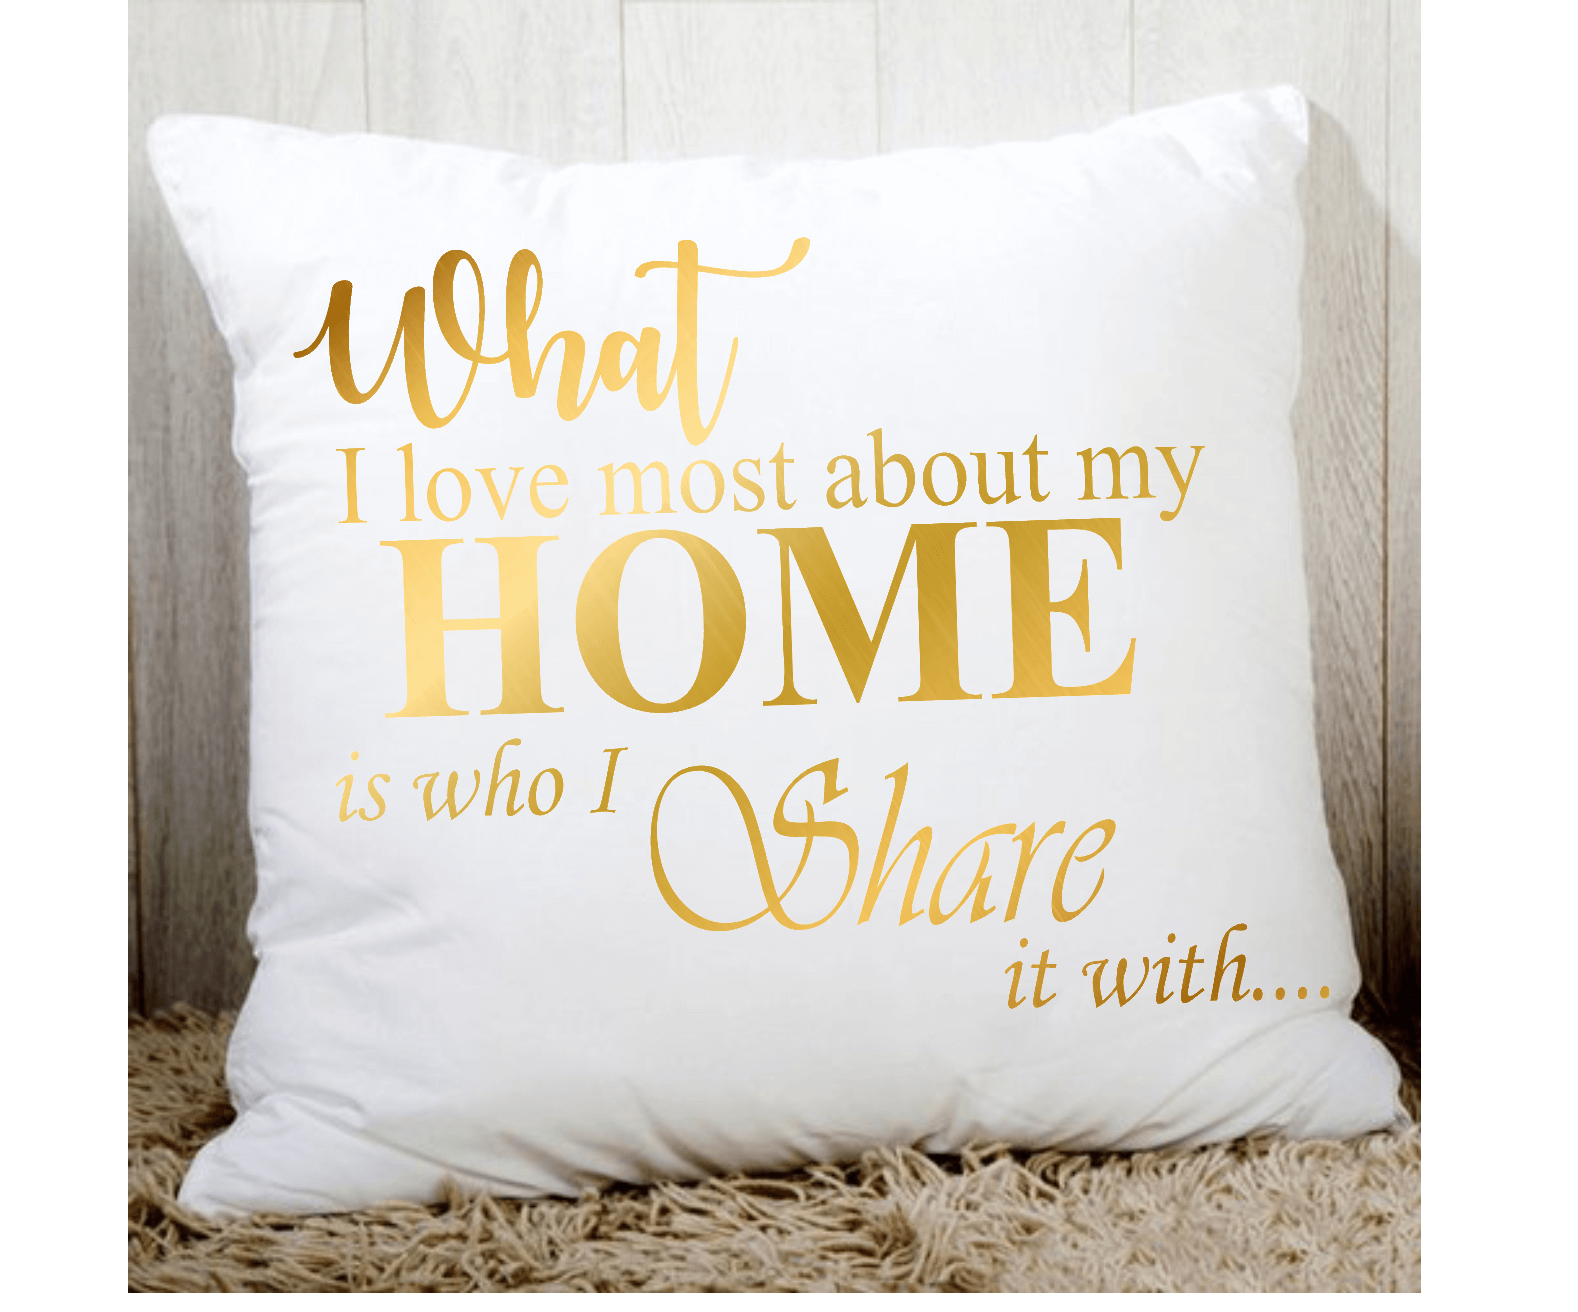 customised printed cushion covers